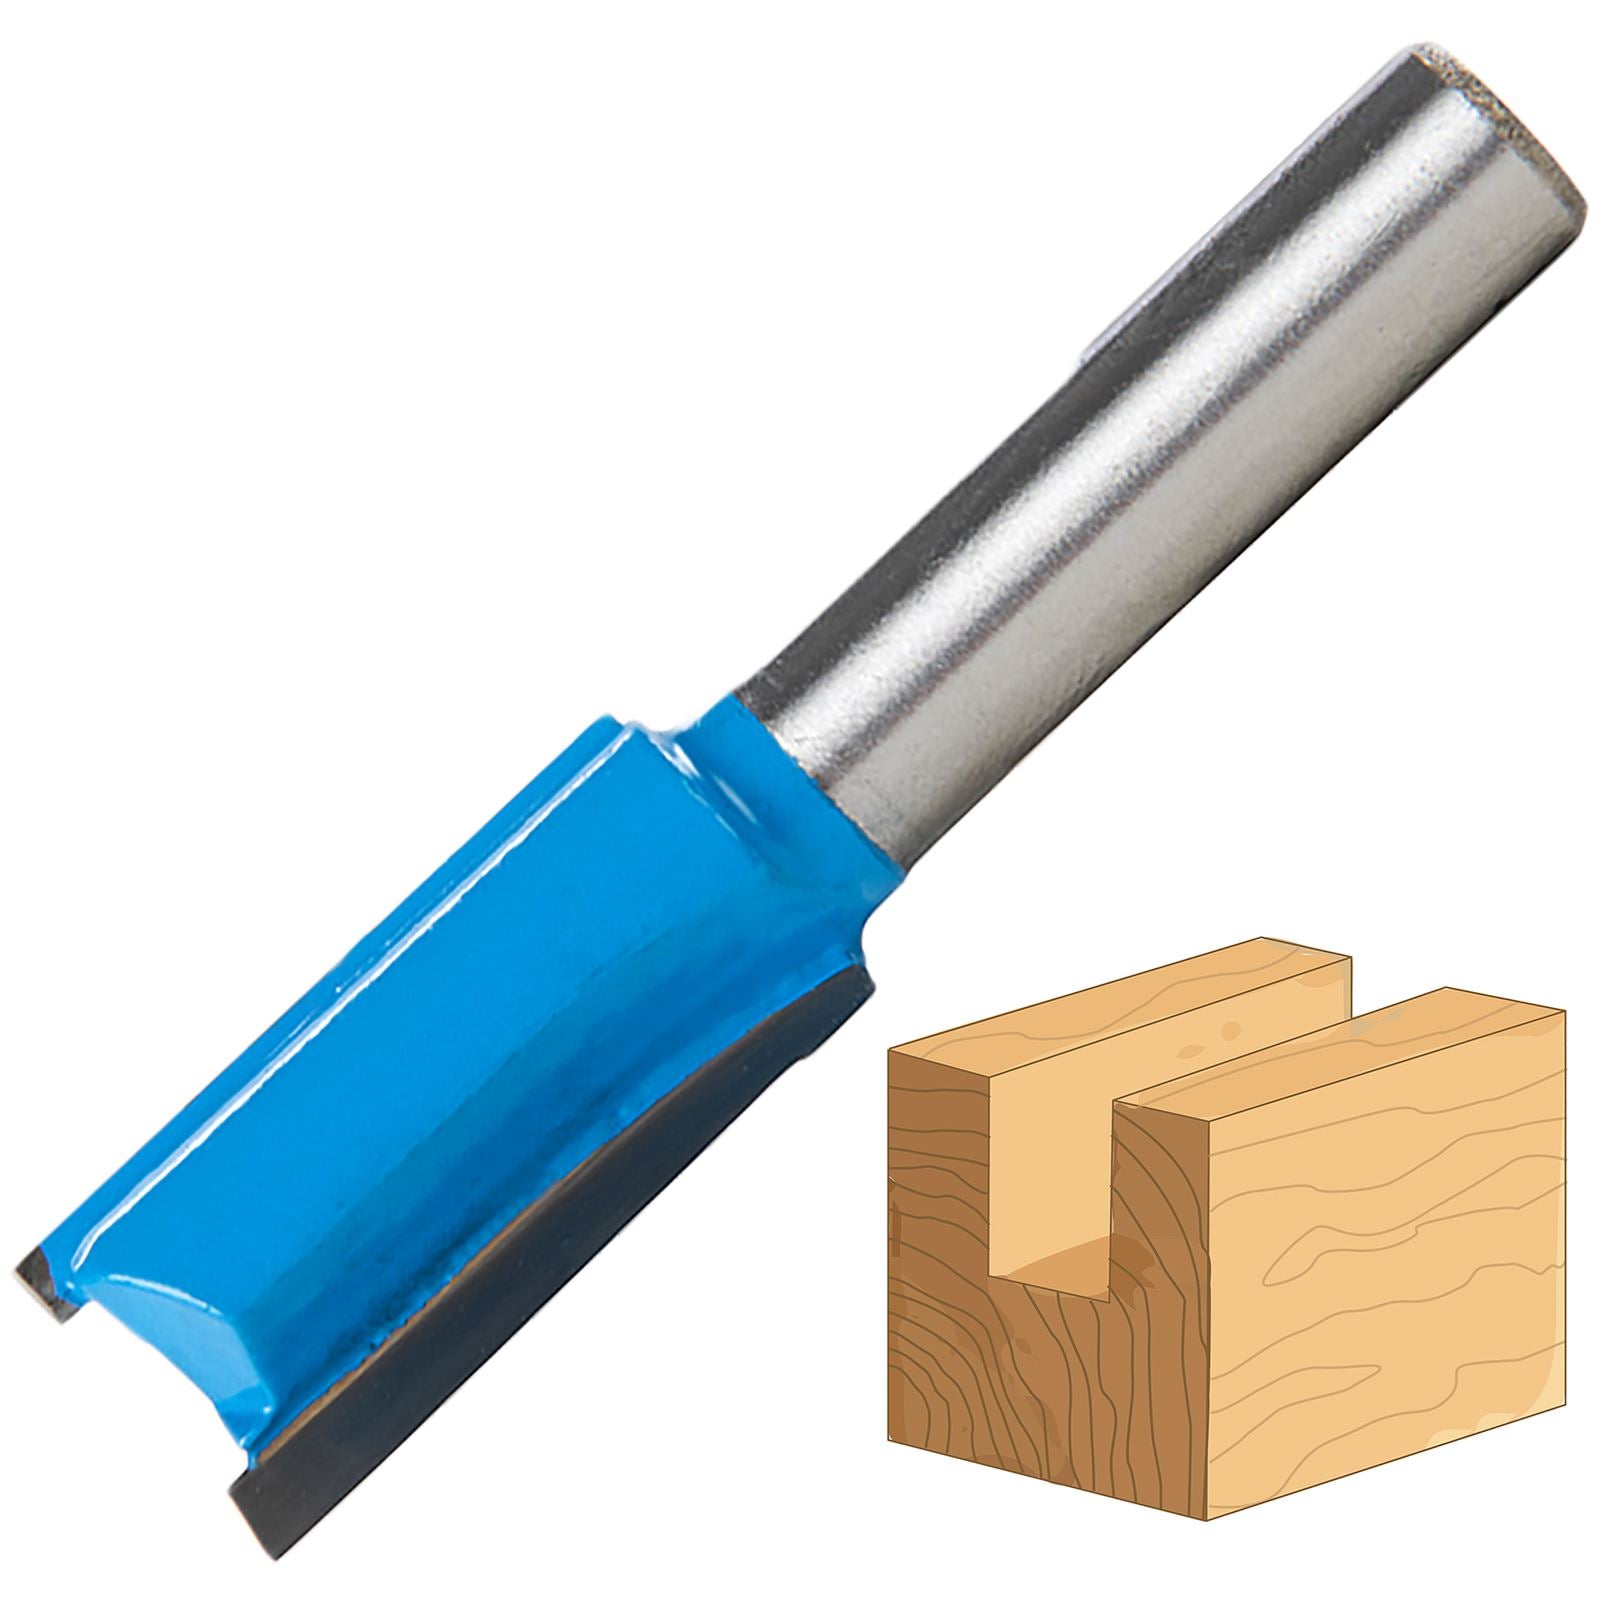 Silverline 8mm Shank Straight Imperial Cutters Router Bits